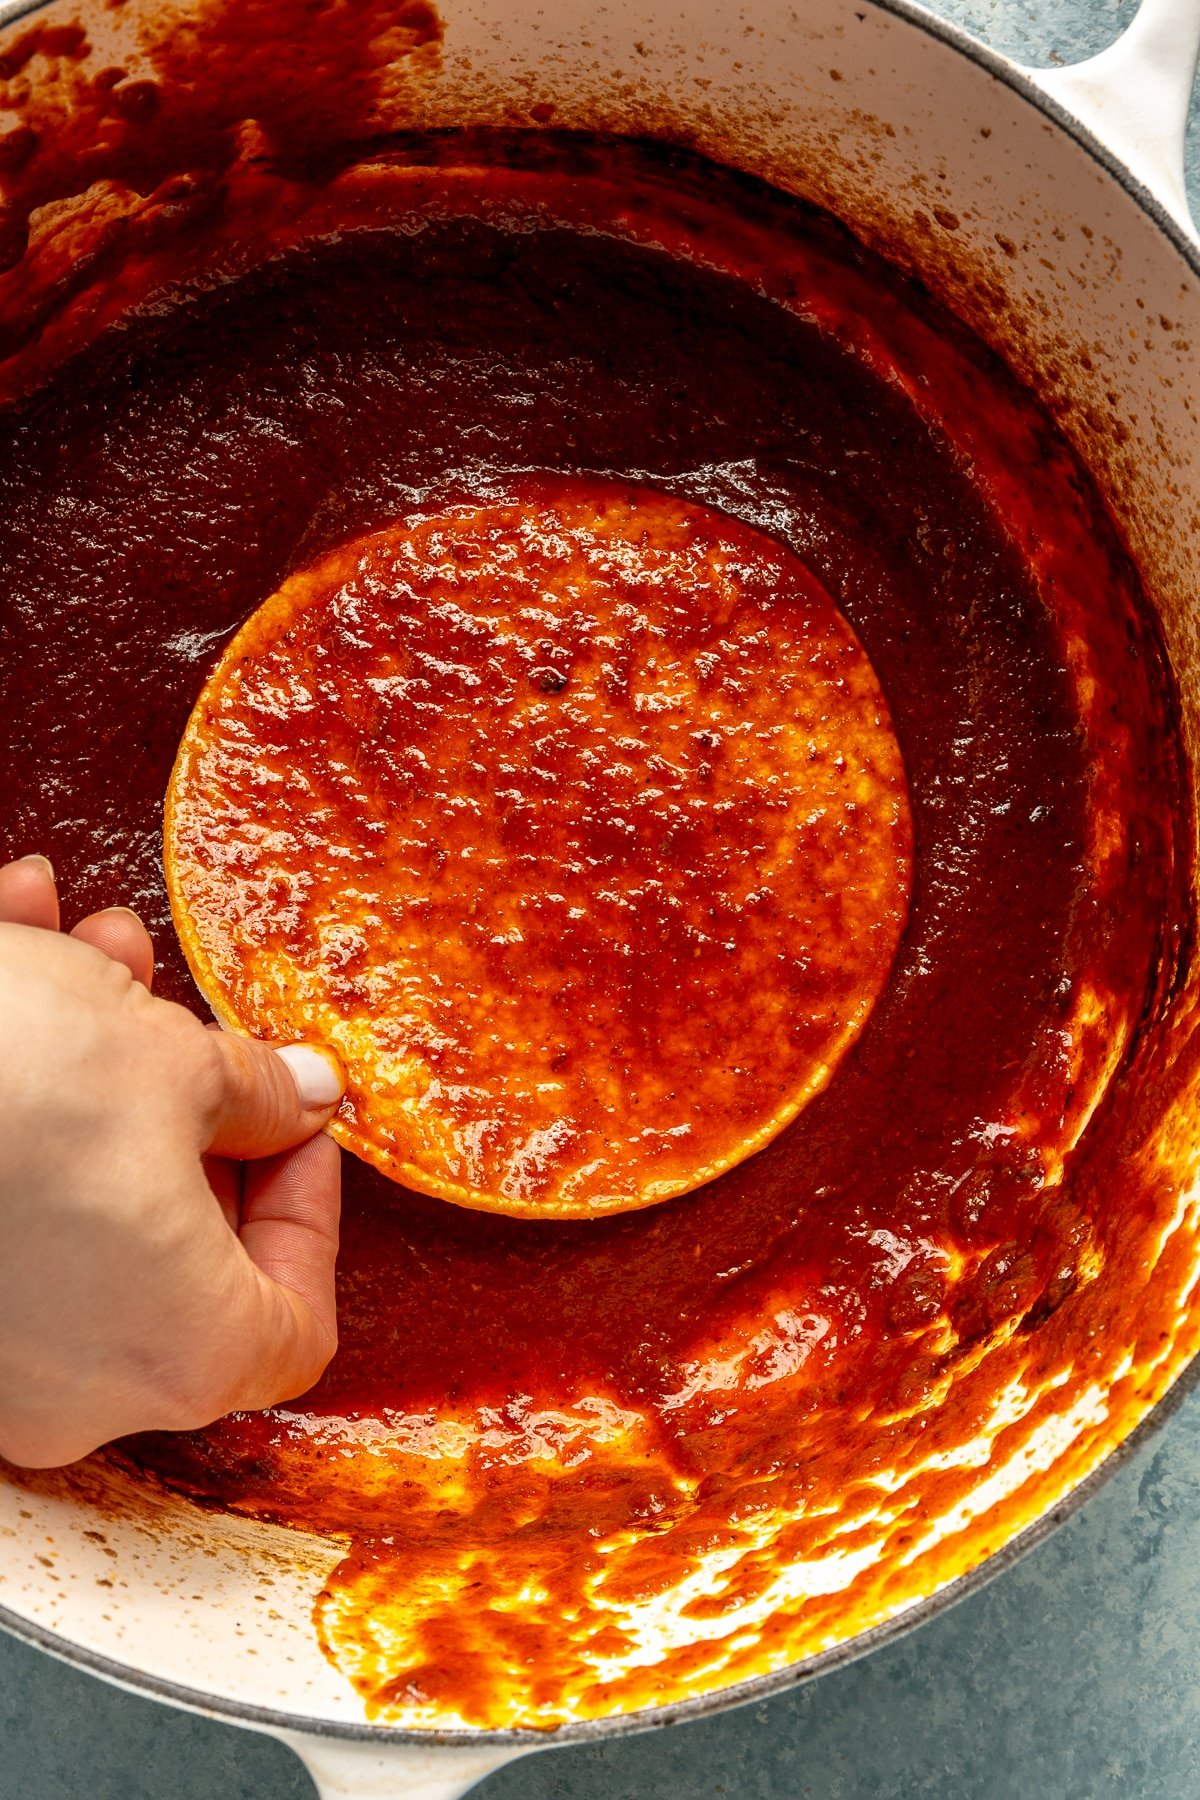 A hand is shown dipping a tortilla into the red sauce.